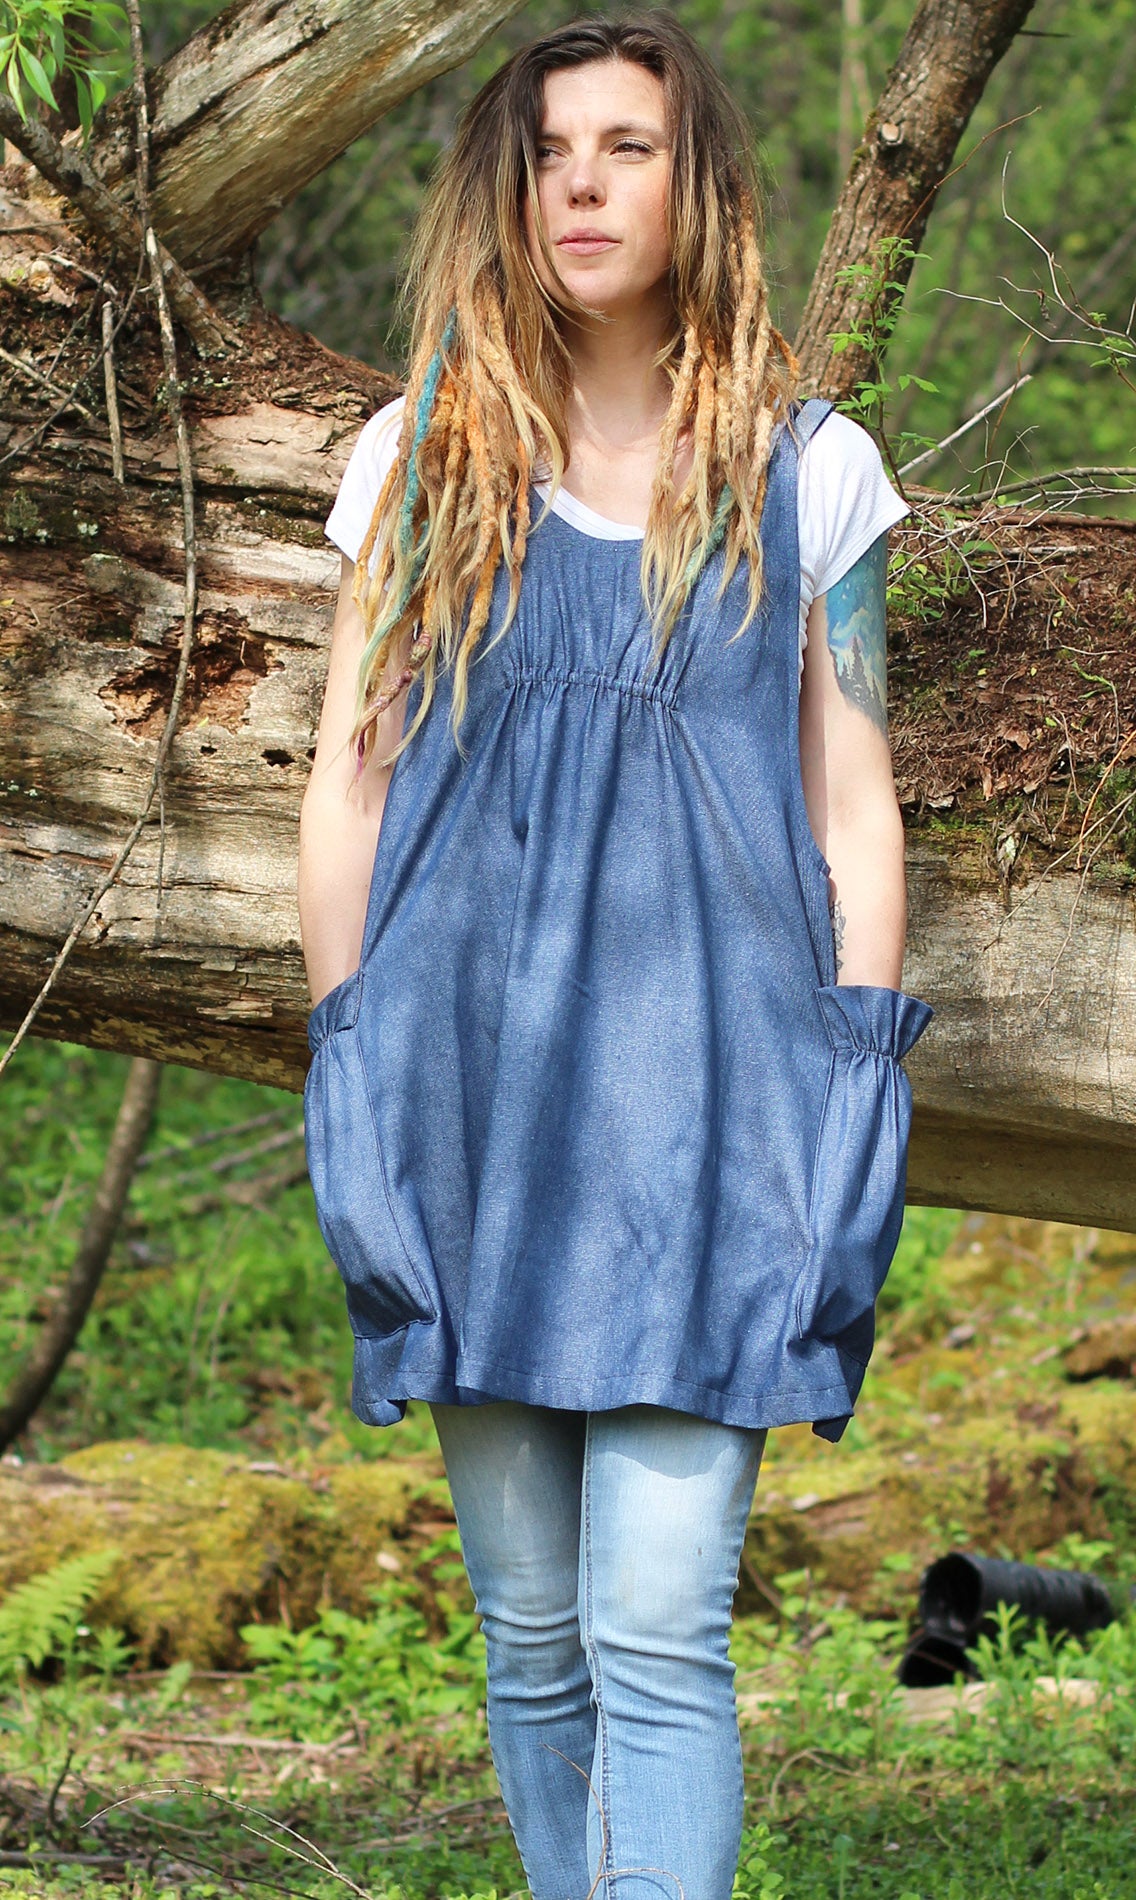 XS-5X Smock #1 in Denim - Front View with model looking into the sun.